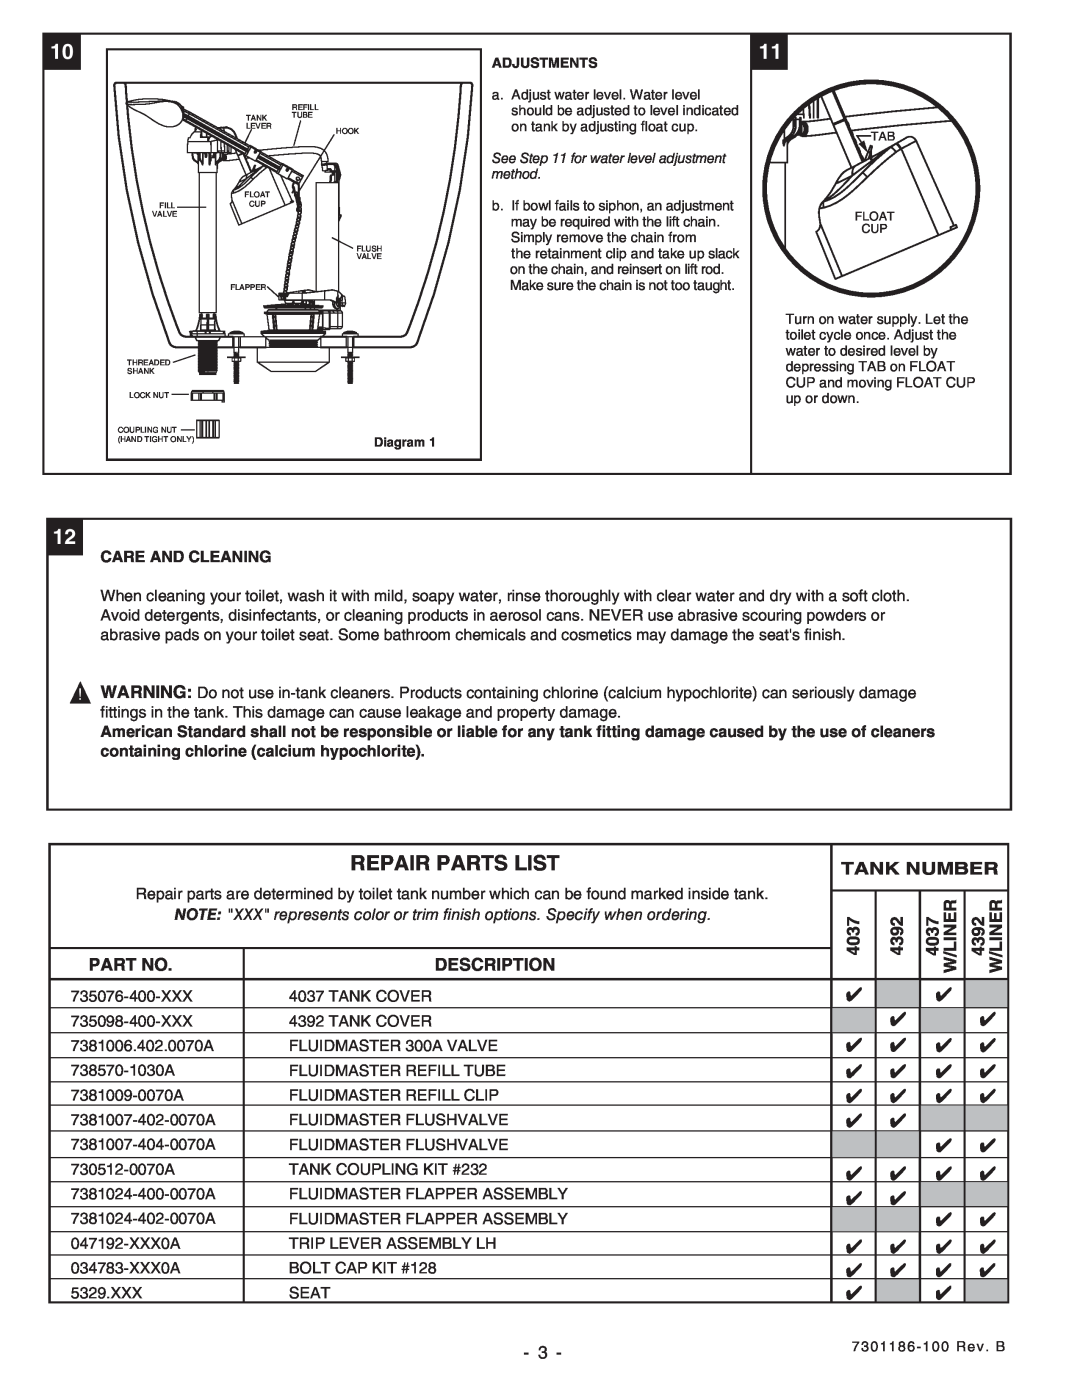 American Standard 2359 Repair Parts List, Description, Tank Number, 4037 W/LINER, 4392 W/LINER, Care And Cleaning 